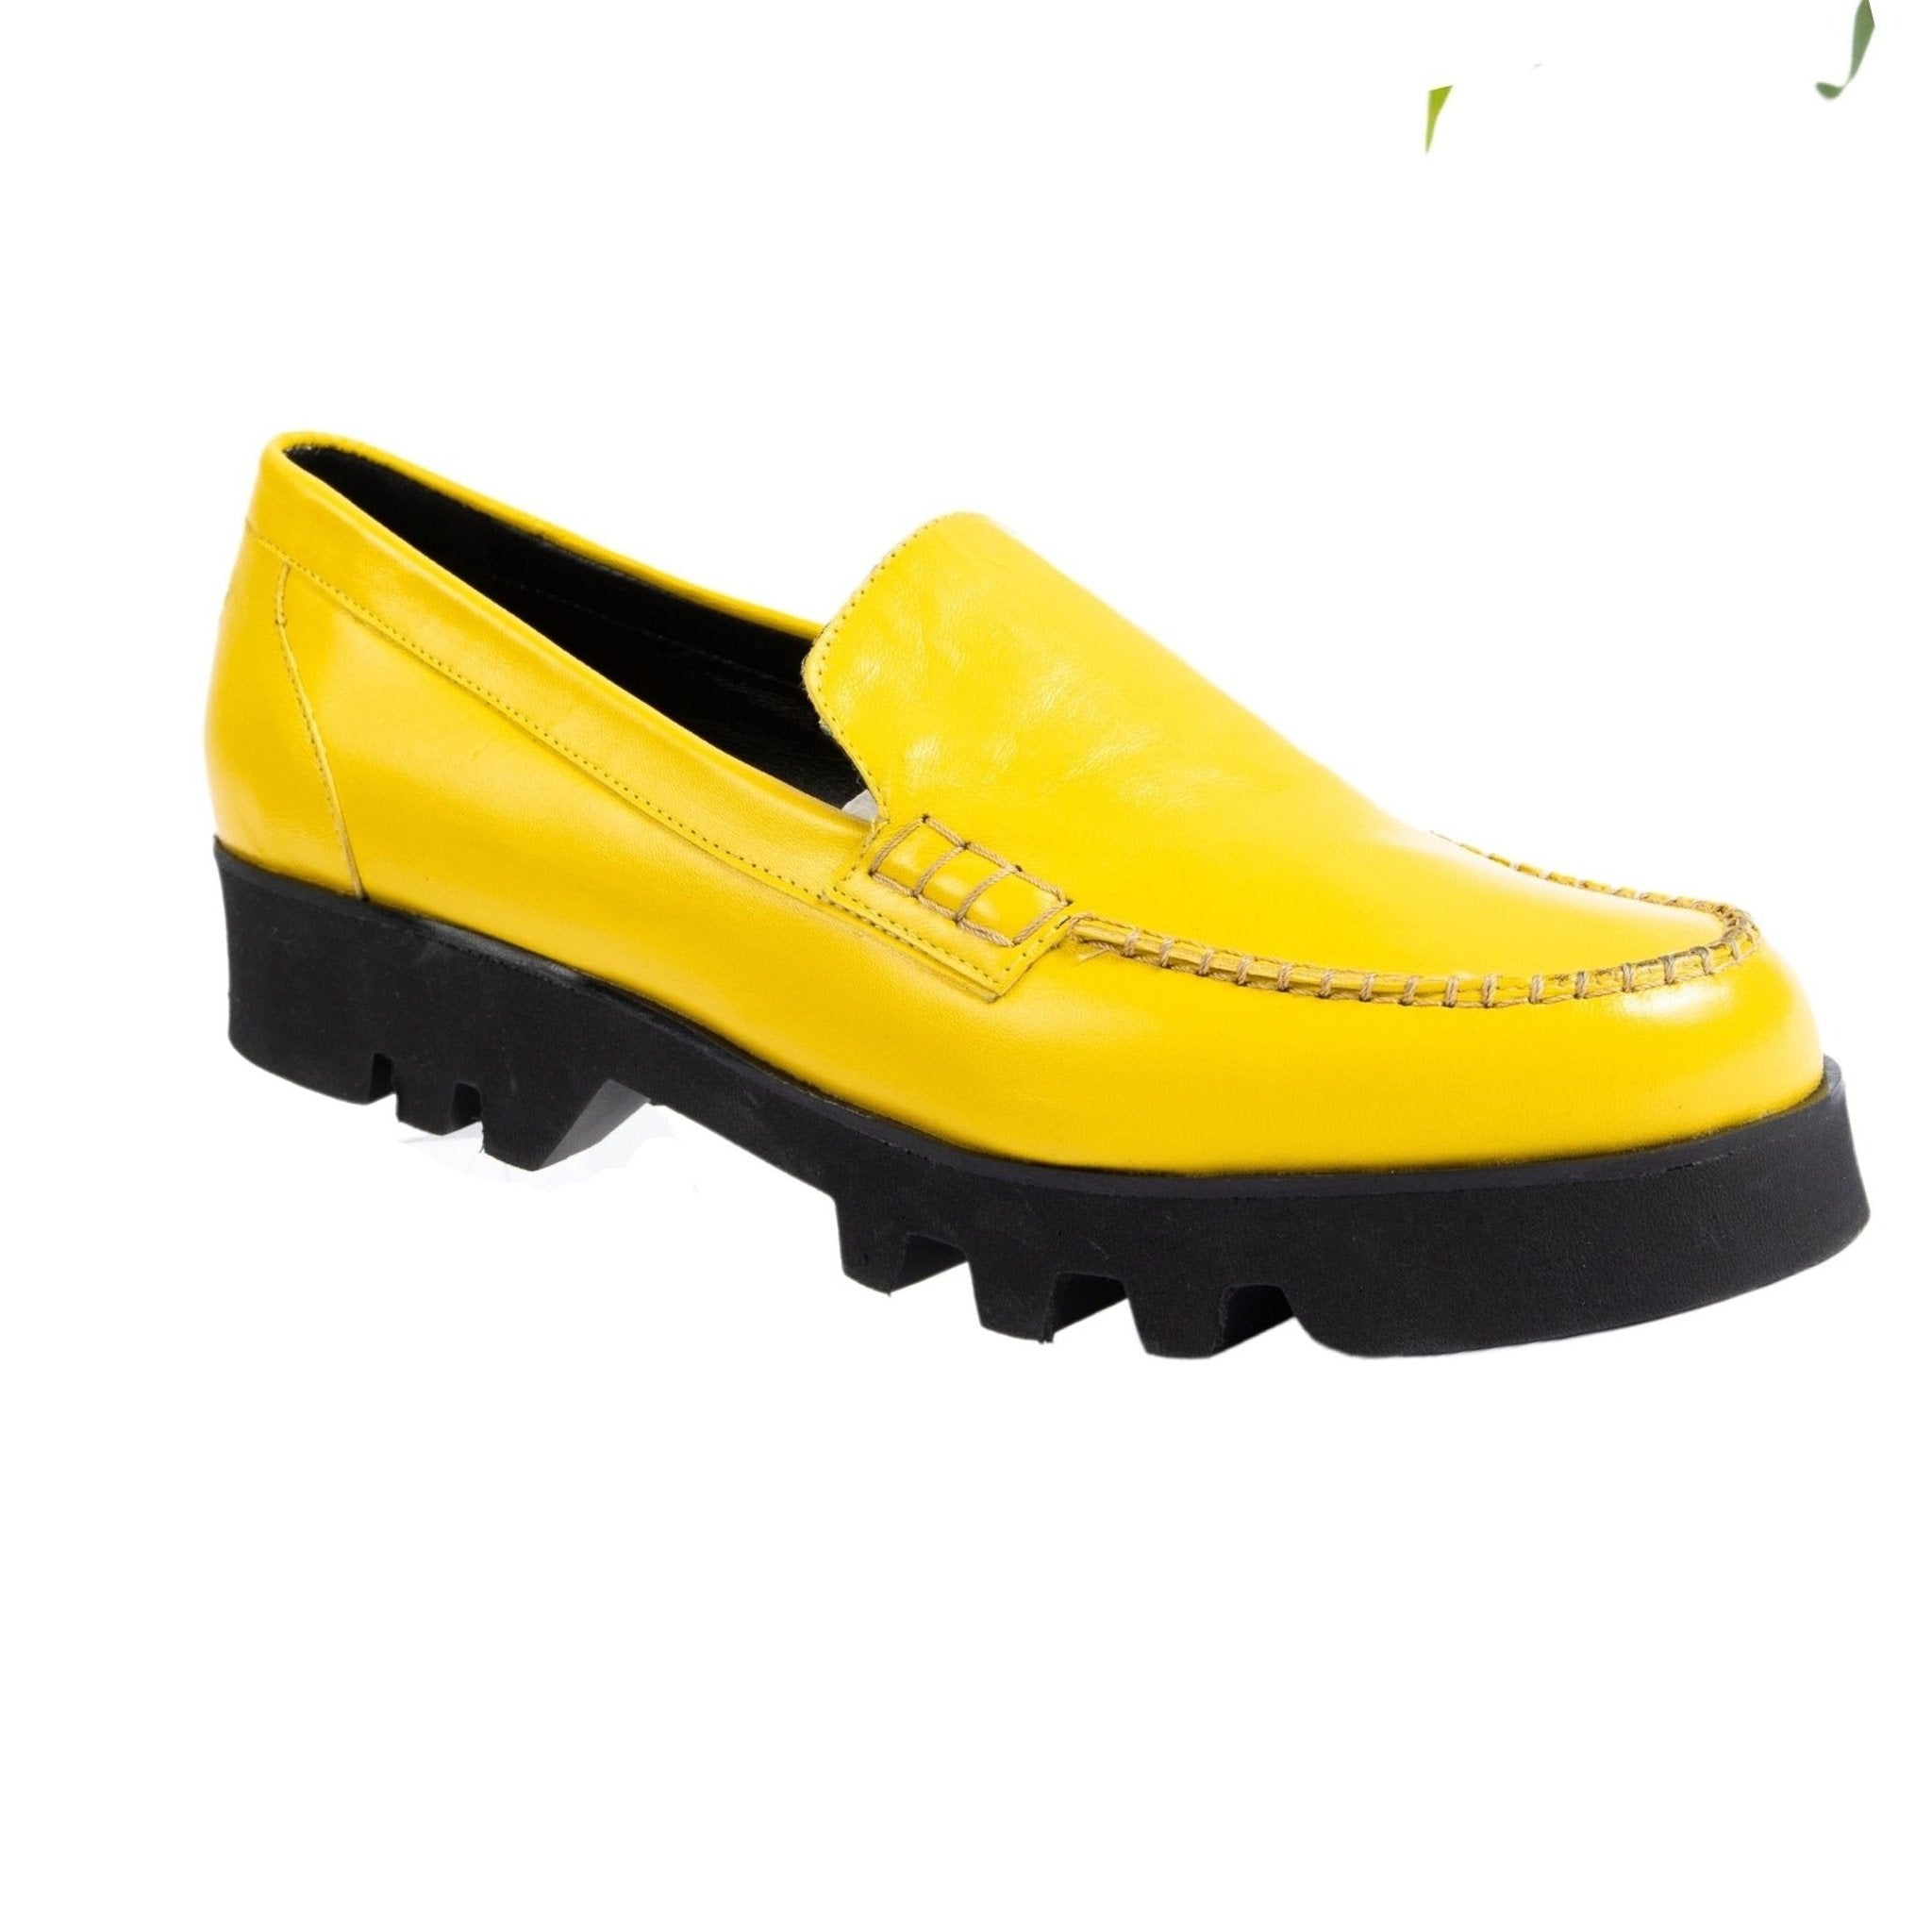 yellow smooth leather loafer large sizes side